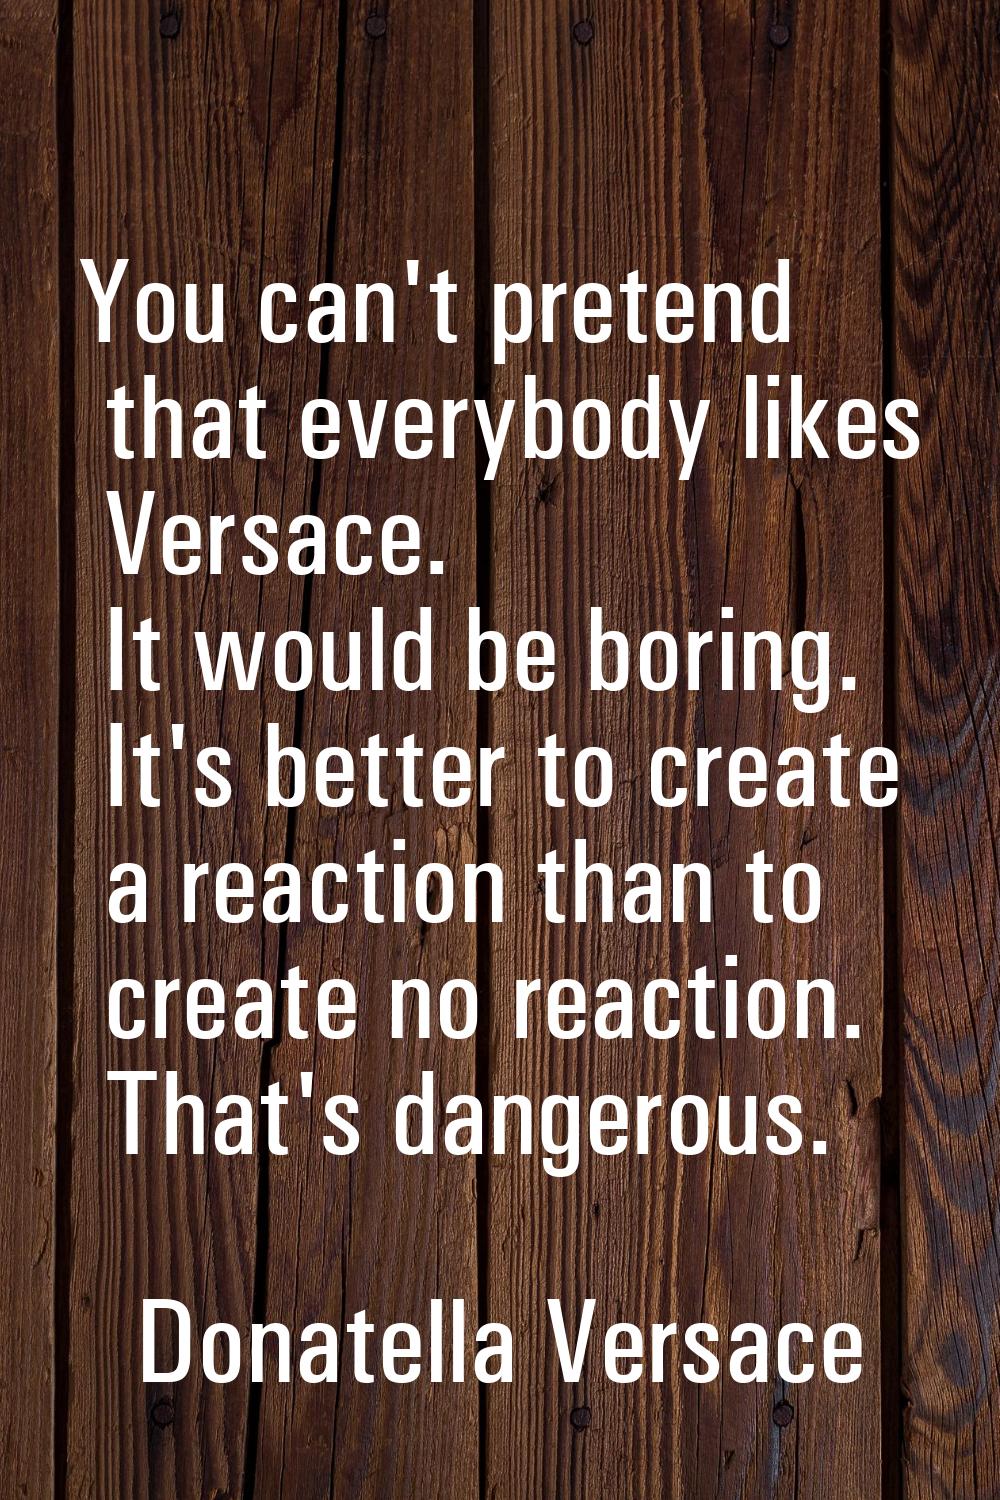 You can't pretend that everybody likes Versace. It would be boring. It's better to create a reactio